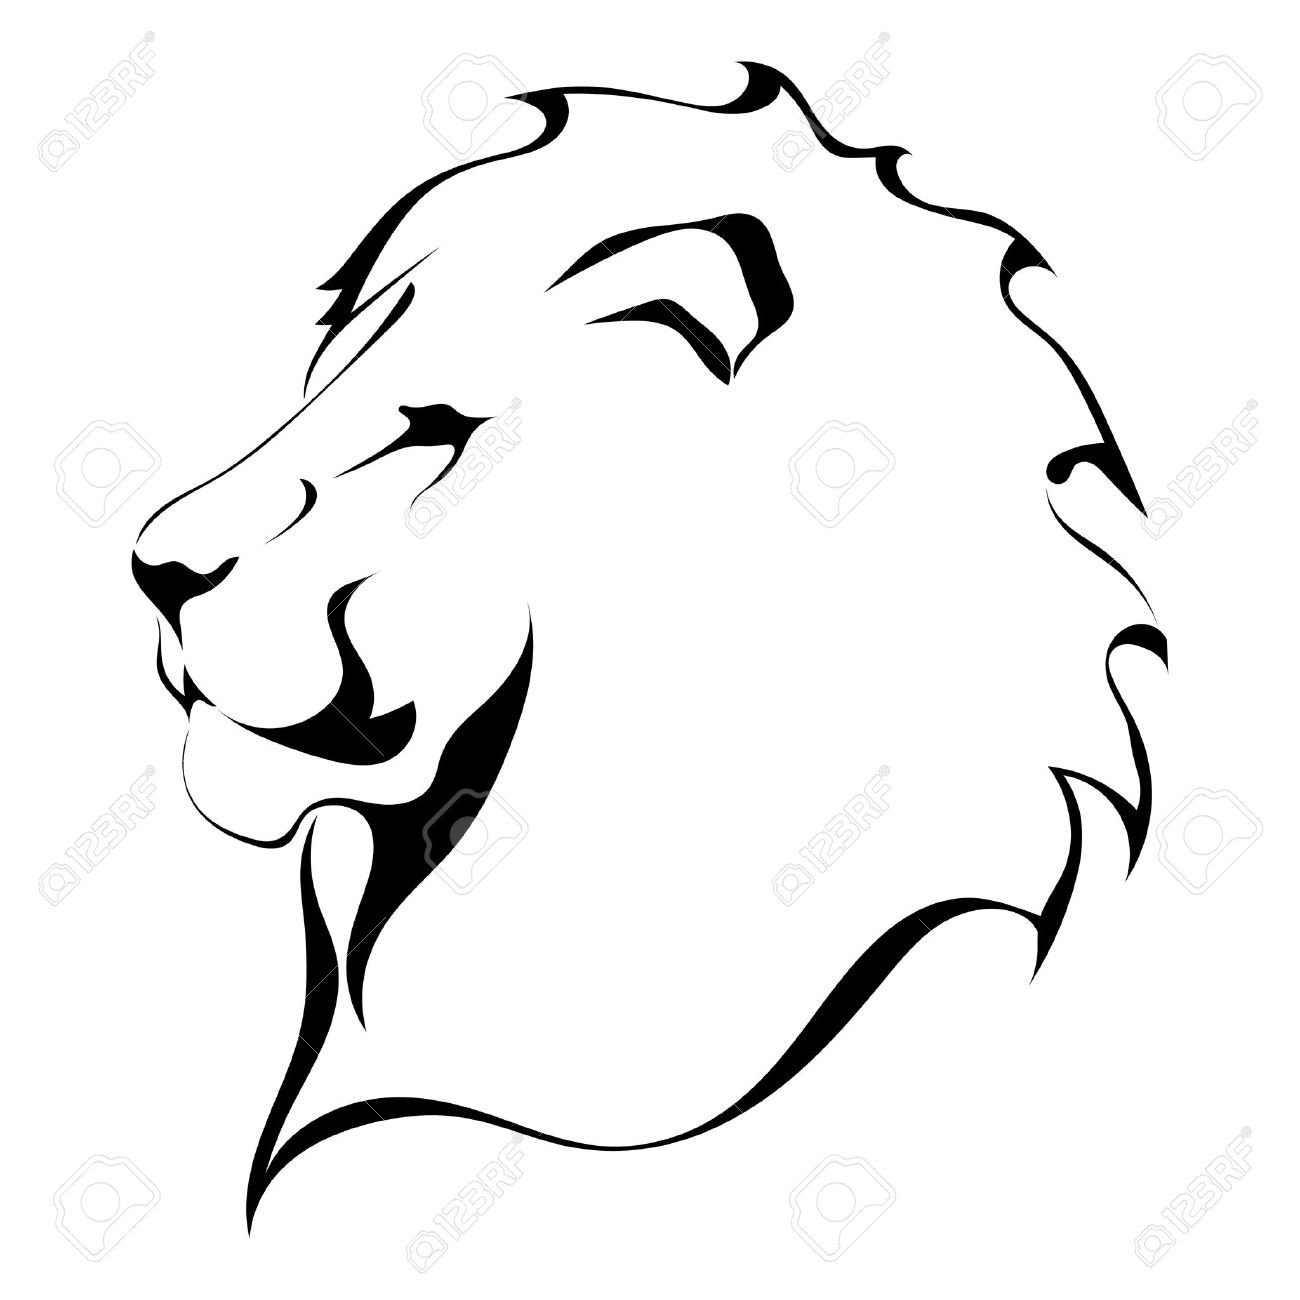 aslan clipart black and white outline Clipground